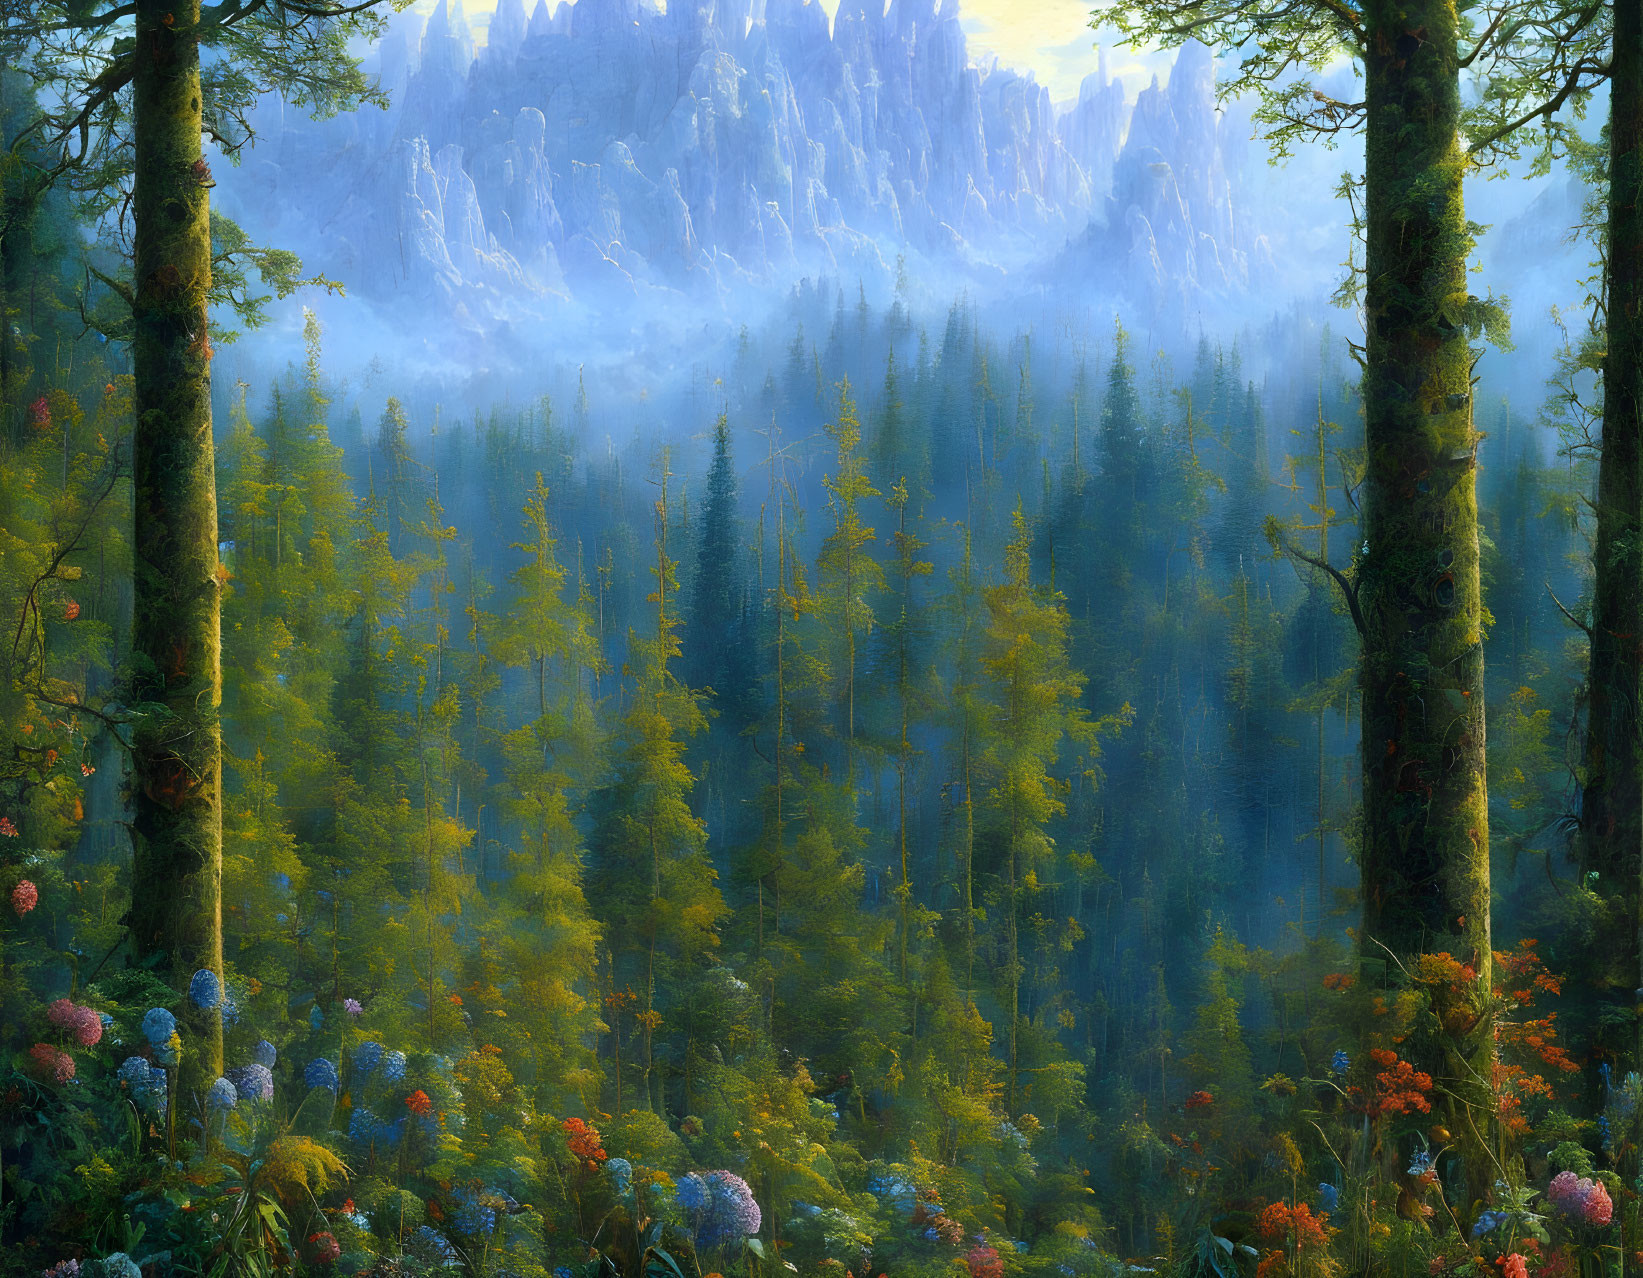 Tranquil forest scene with mist, greenery, flowers, and mountains